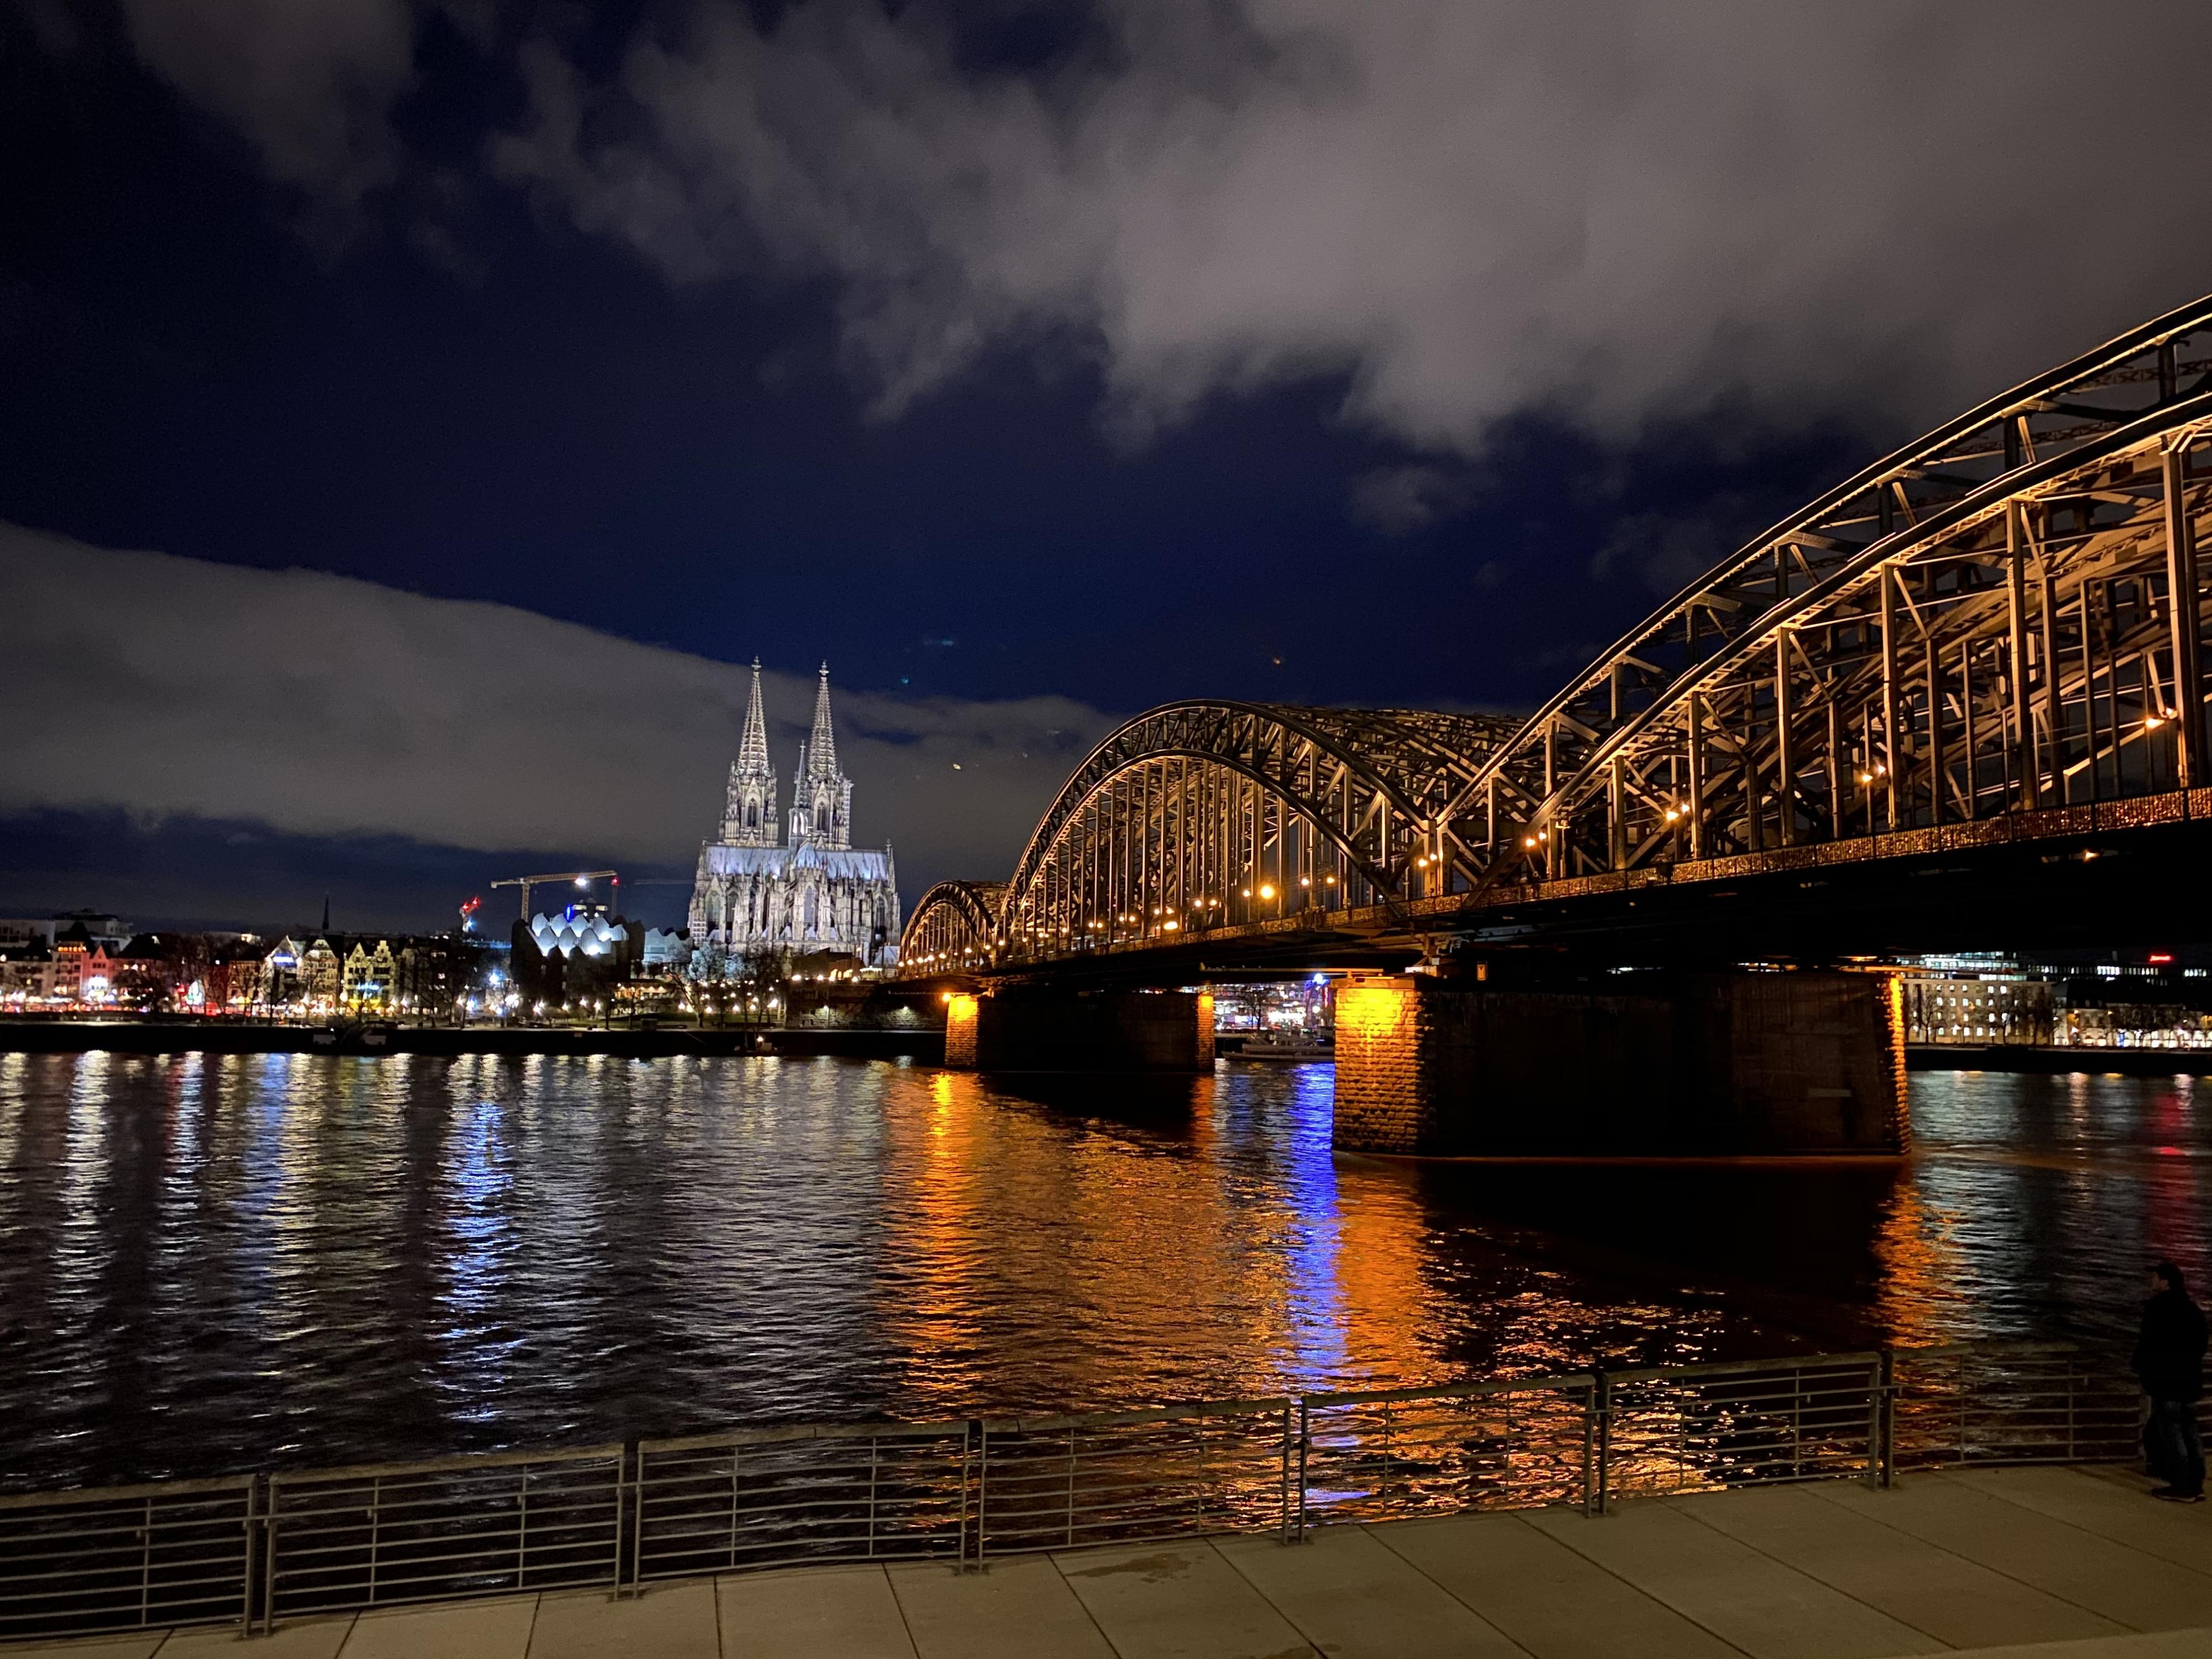 Night photo of a bridge with an elaborate cathedral in the background